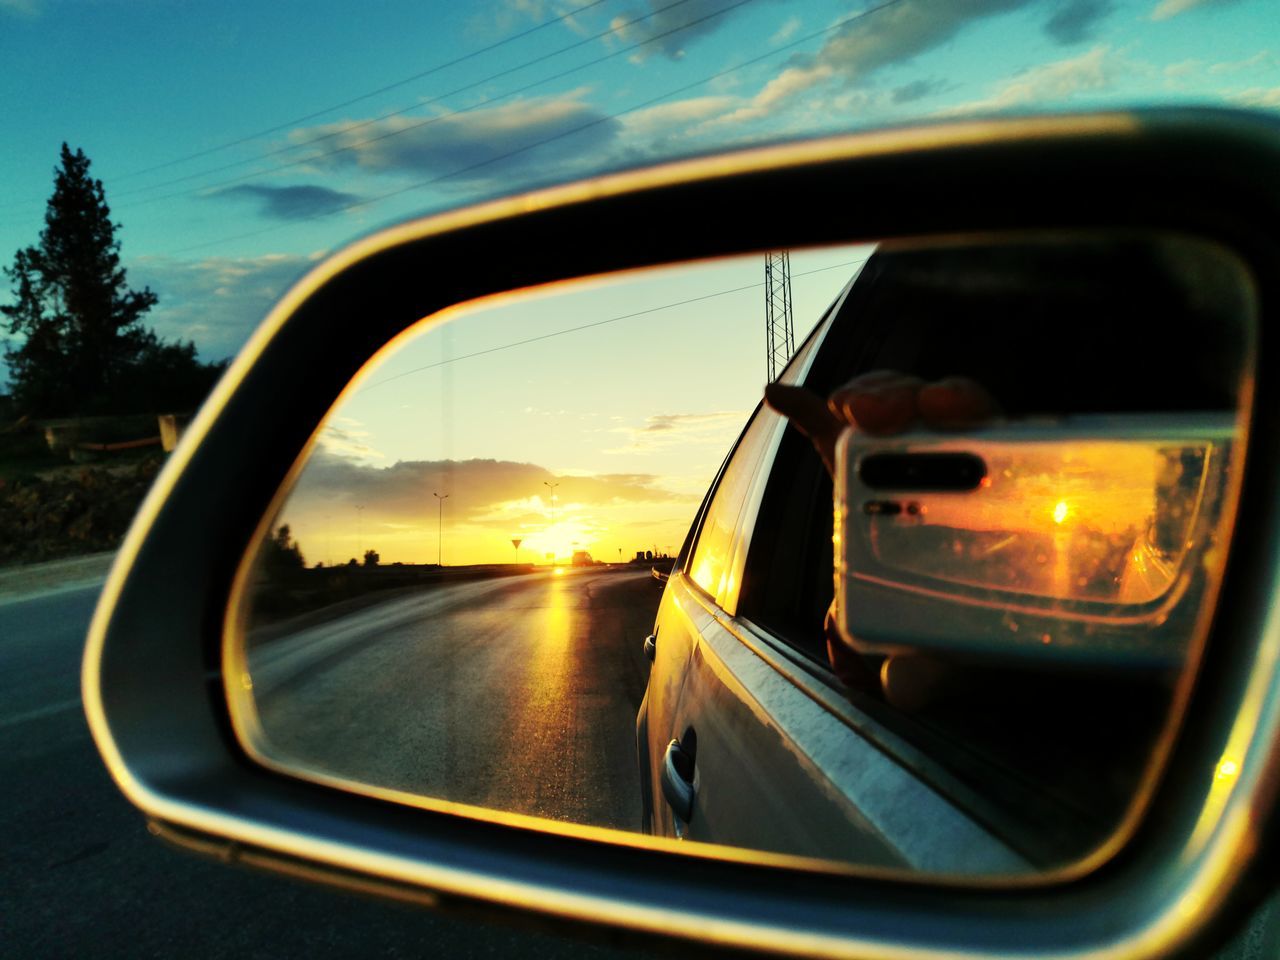 REFLECTION OF SKY ON SIDE-VIEW MIRROR